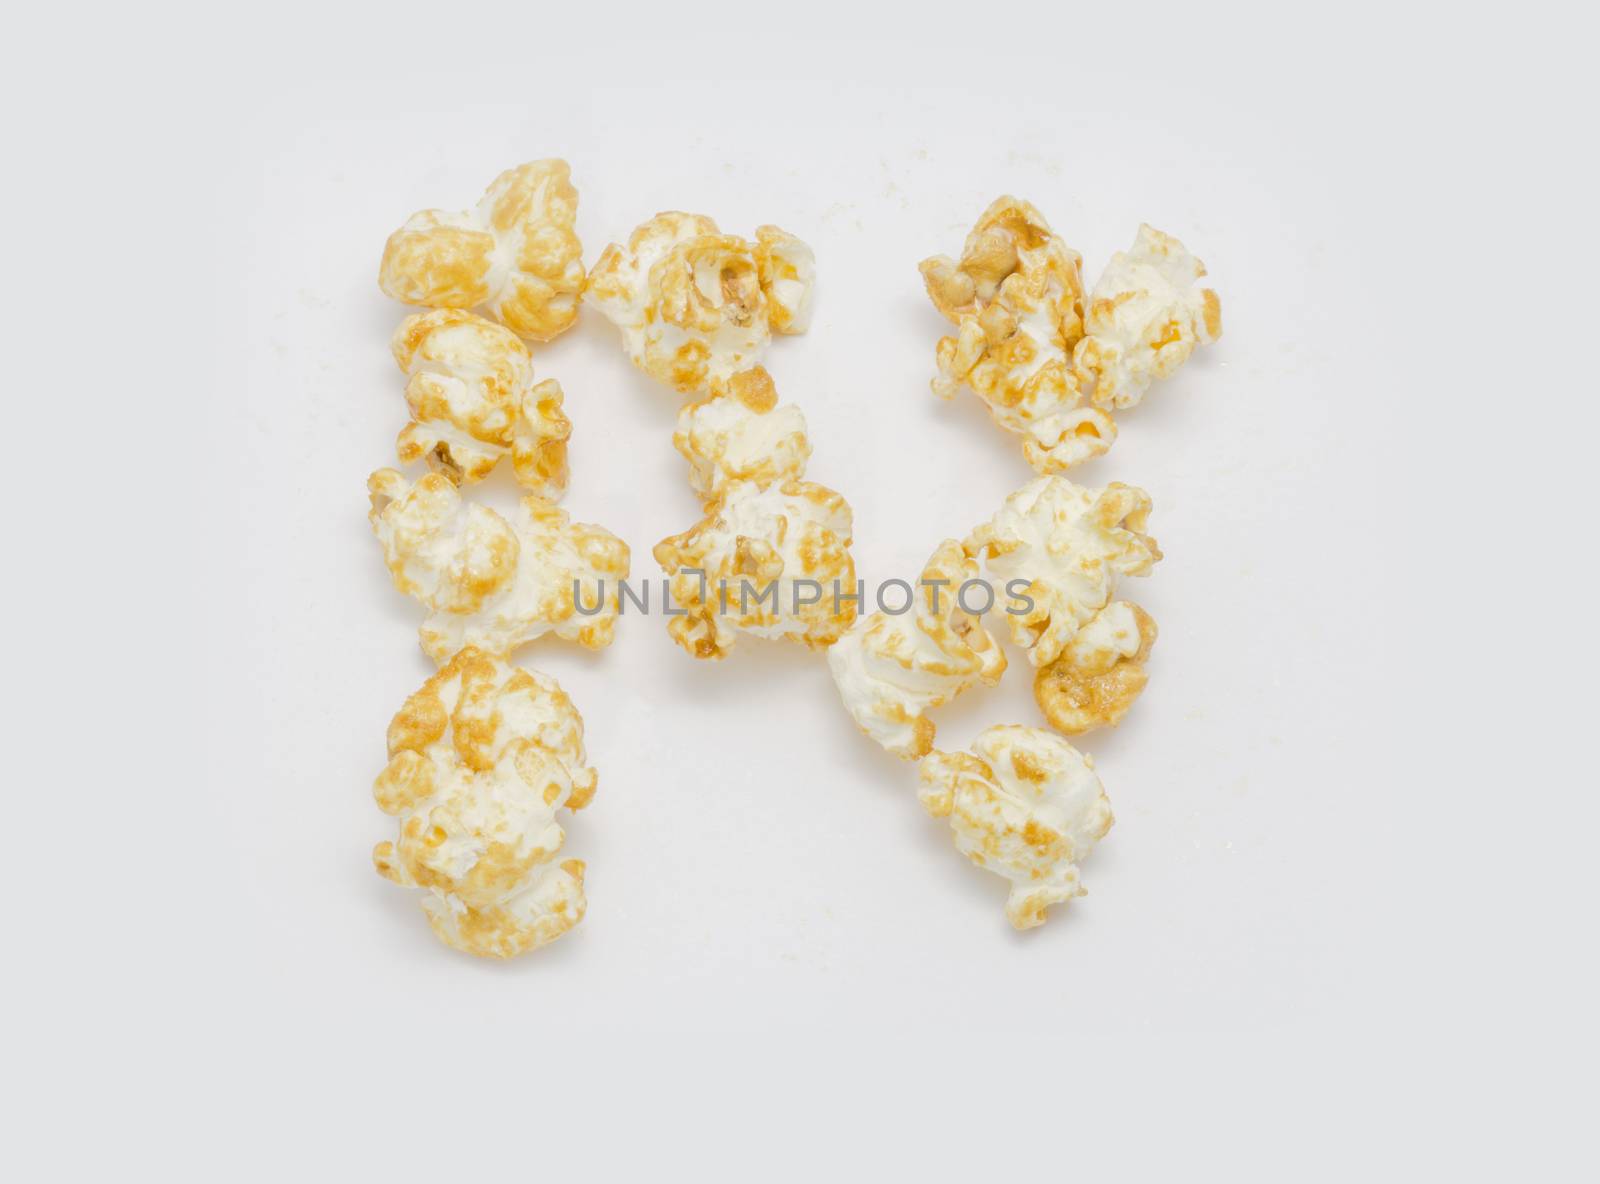 pop corn forming letter N isolated on white background by chingraph